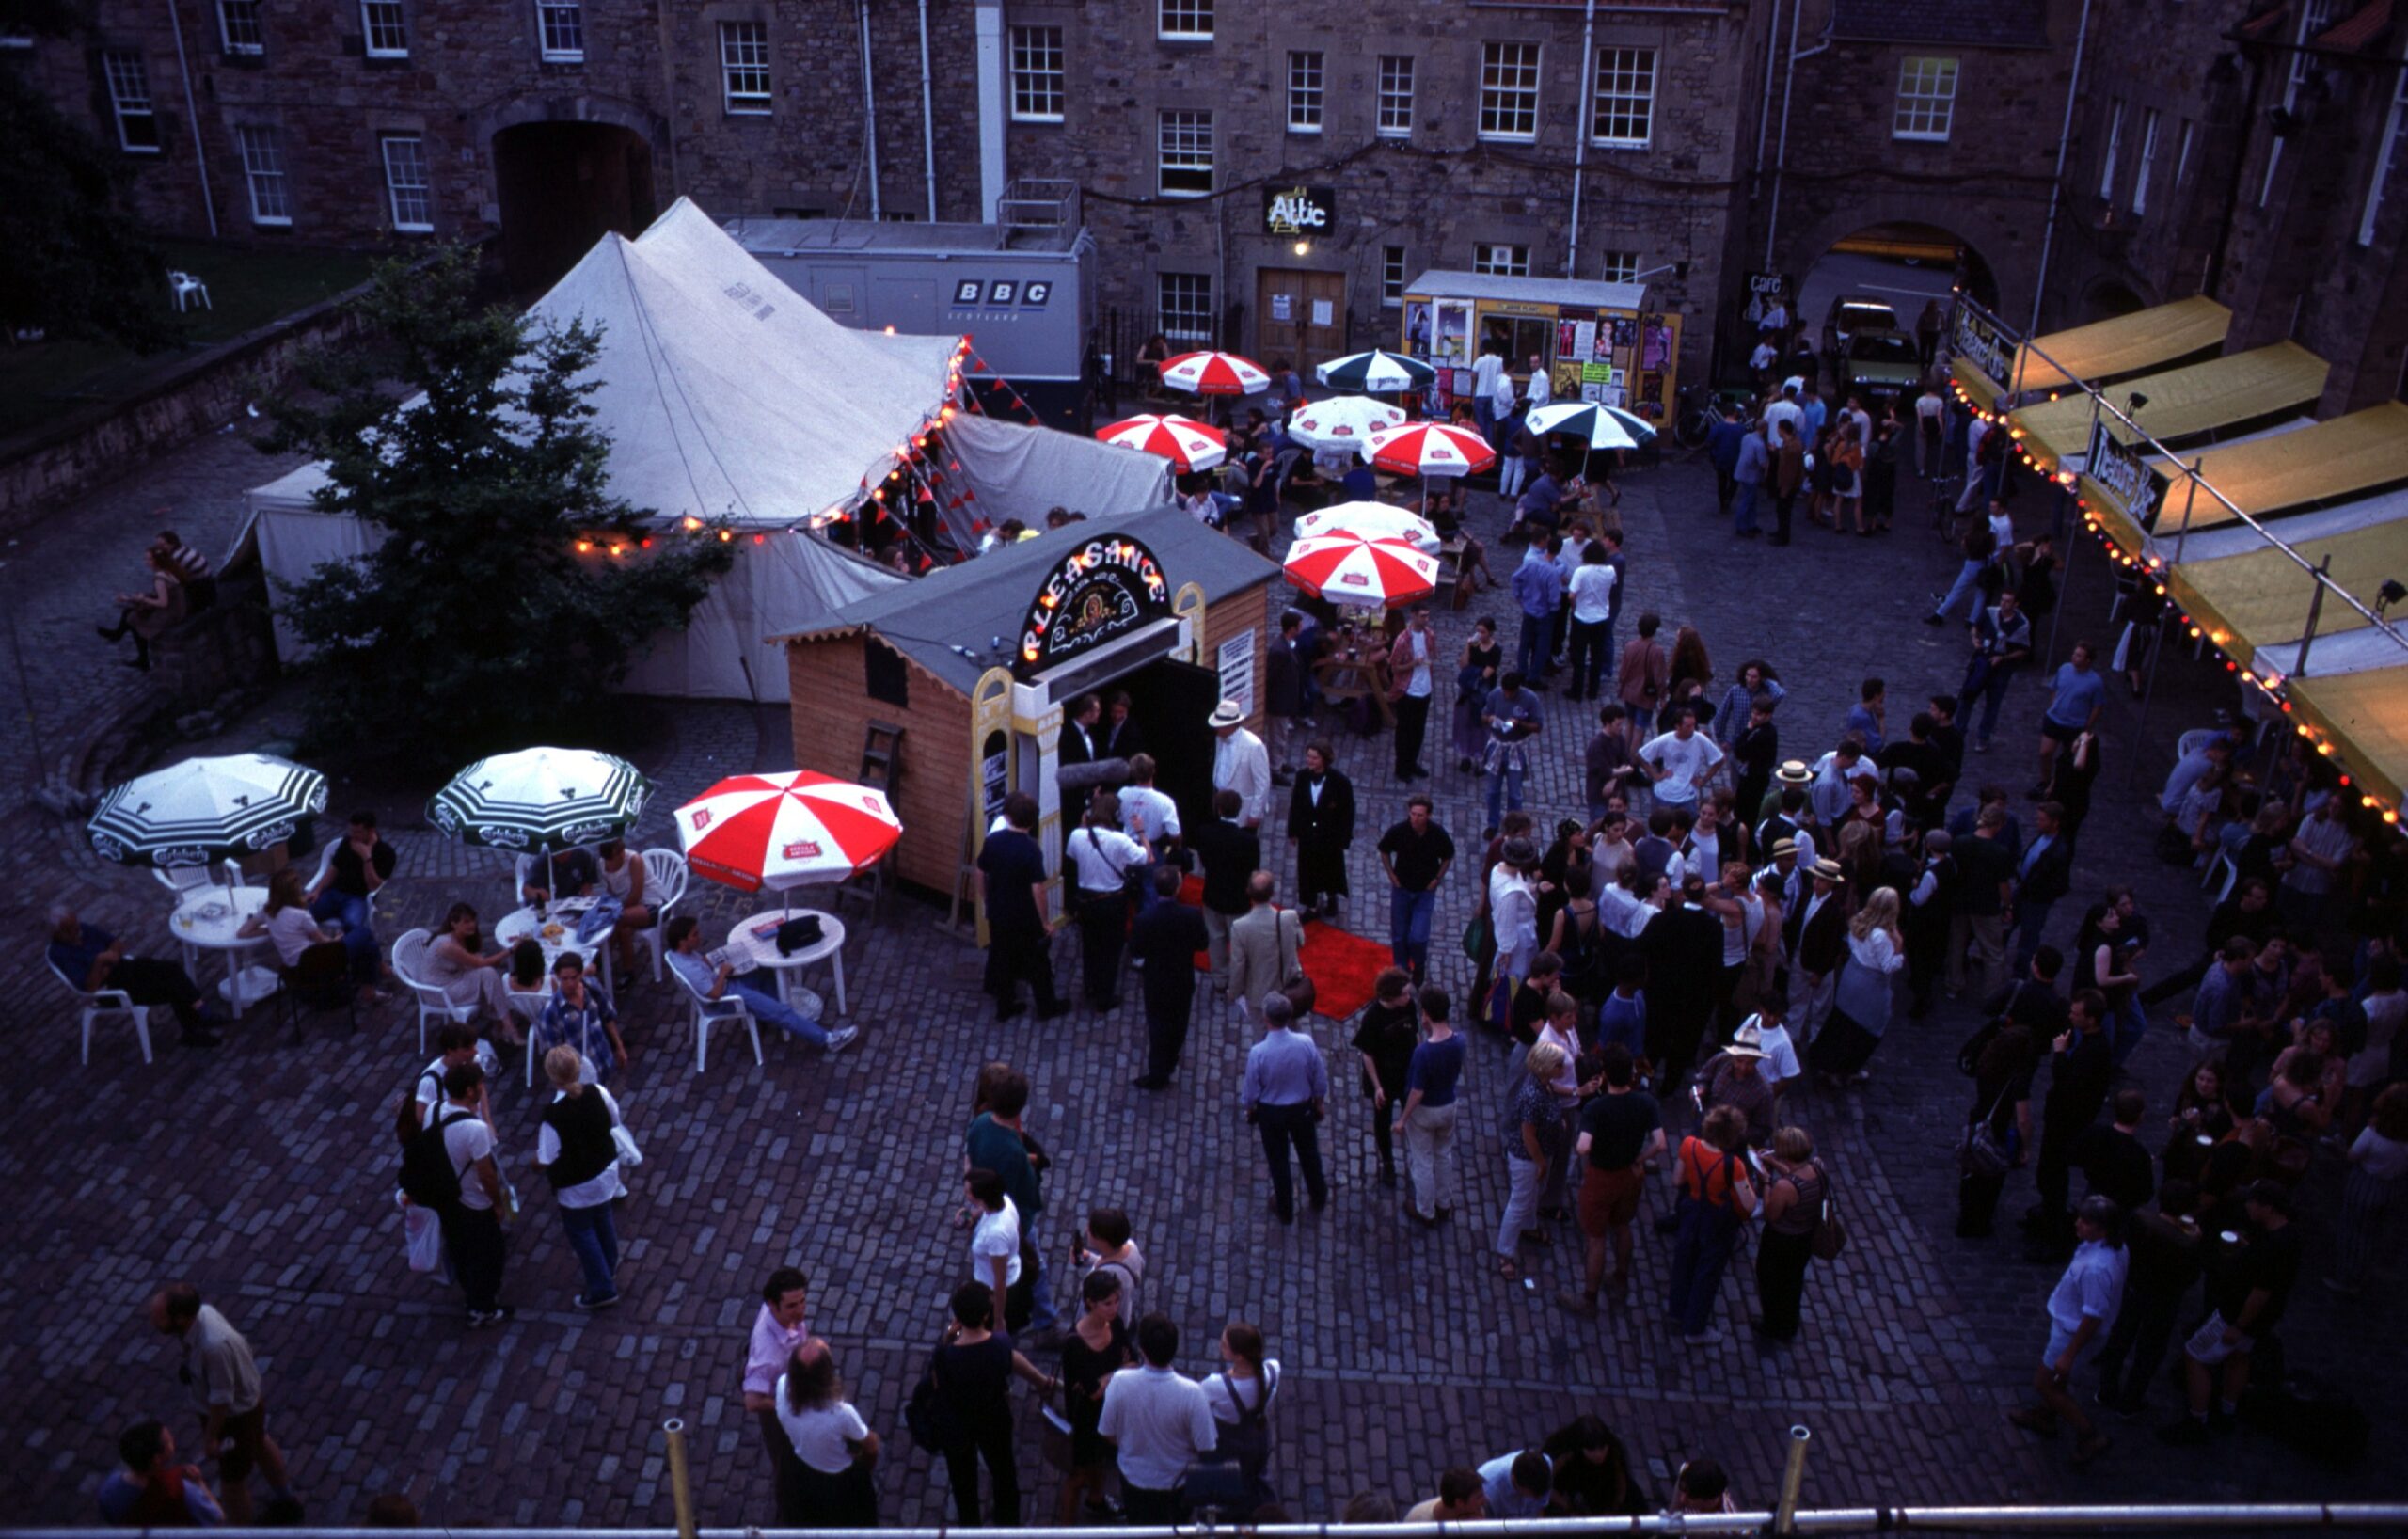 A view overlooking the Pleasance courtyard during the Edinburgh Festival where the smallest theatre was located. There are crowds gathering in the courtyard and the small stands.